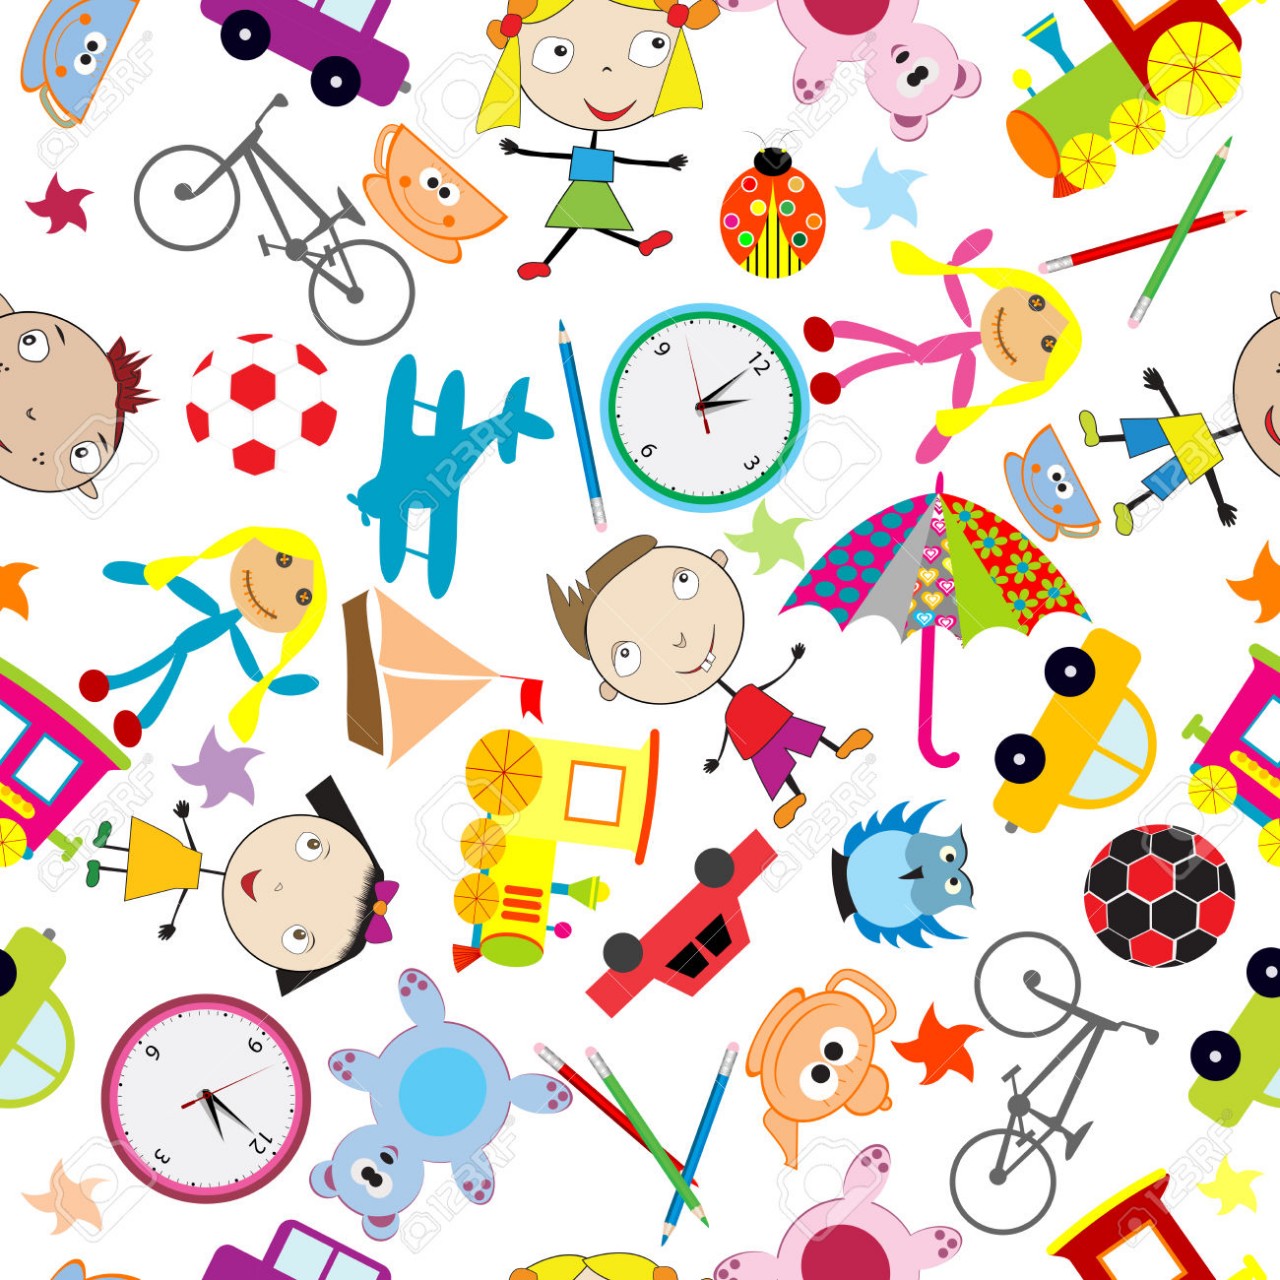 26788153-Seamless-pattern-with-toys-background-for-kids-Stock-Photo